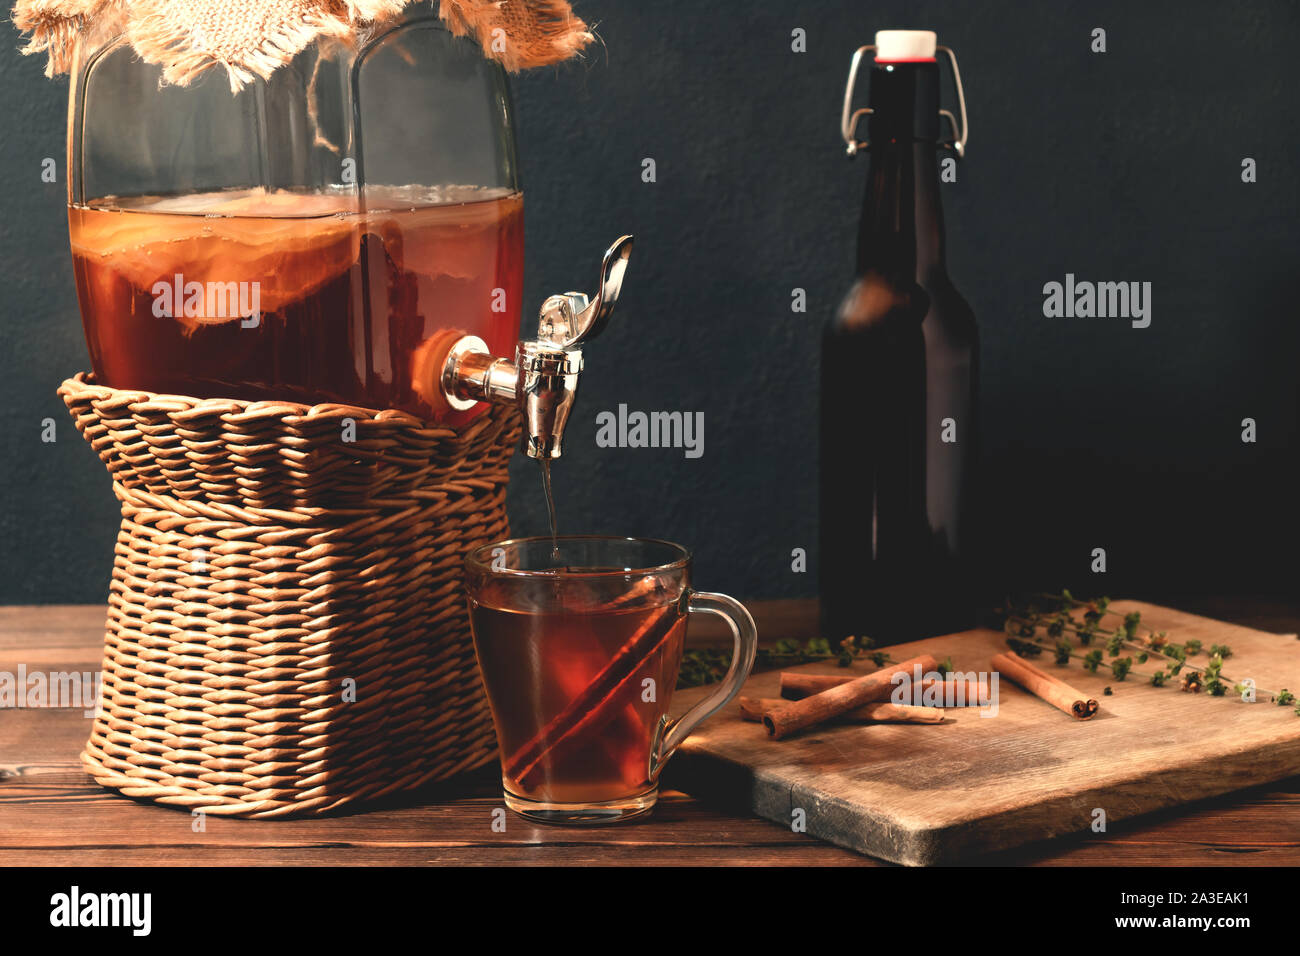 Fresh homemade Kombucha fermented tea drink in jar with faucet and in cup and bottle on black background. Stock Photo